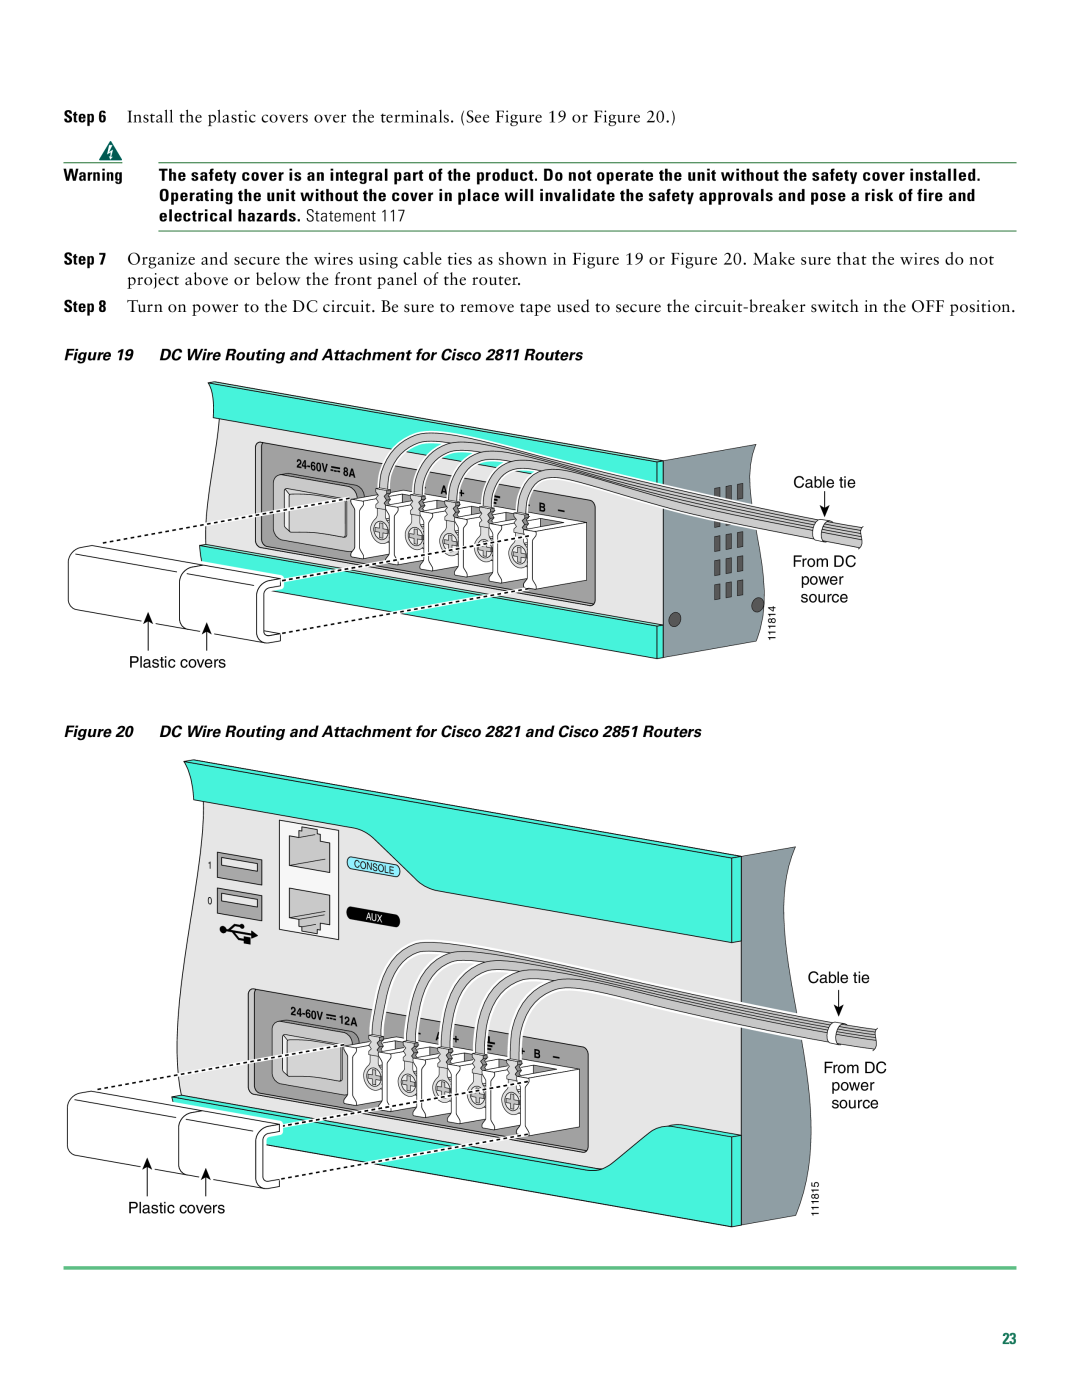 Cisco Systems 2800 manual electrical hazards. Statement, DC Wire Routing and Attachment for Cisco 2811 Routers 